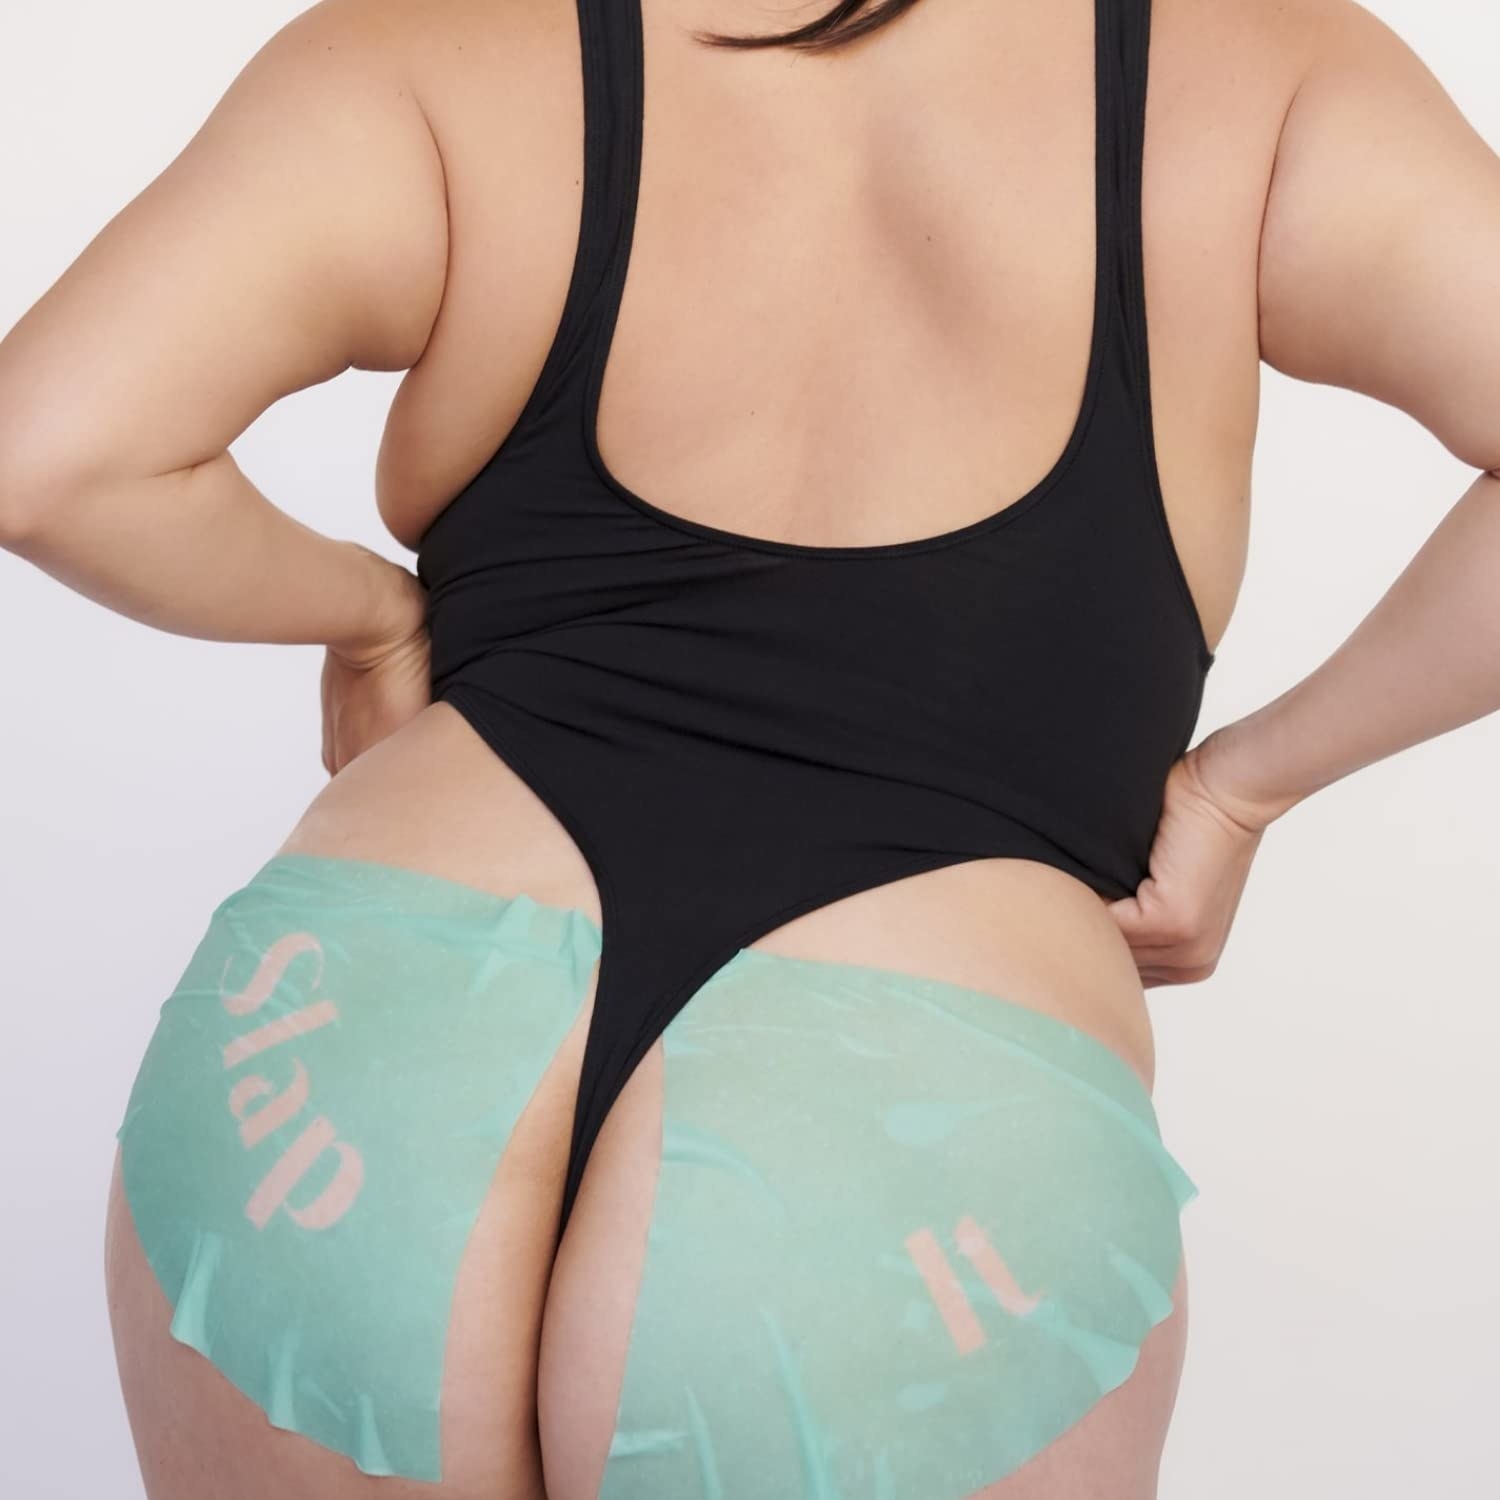 plus size model wearing the mask on their butt cheeks